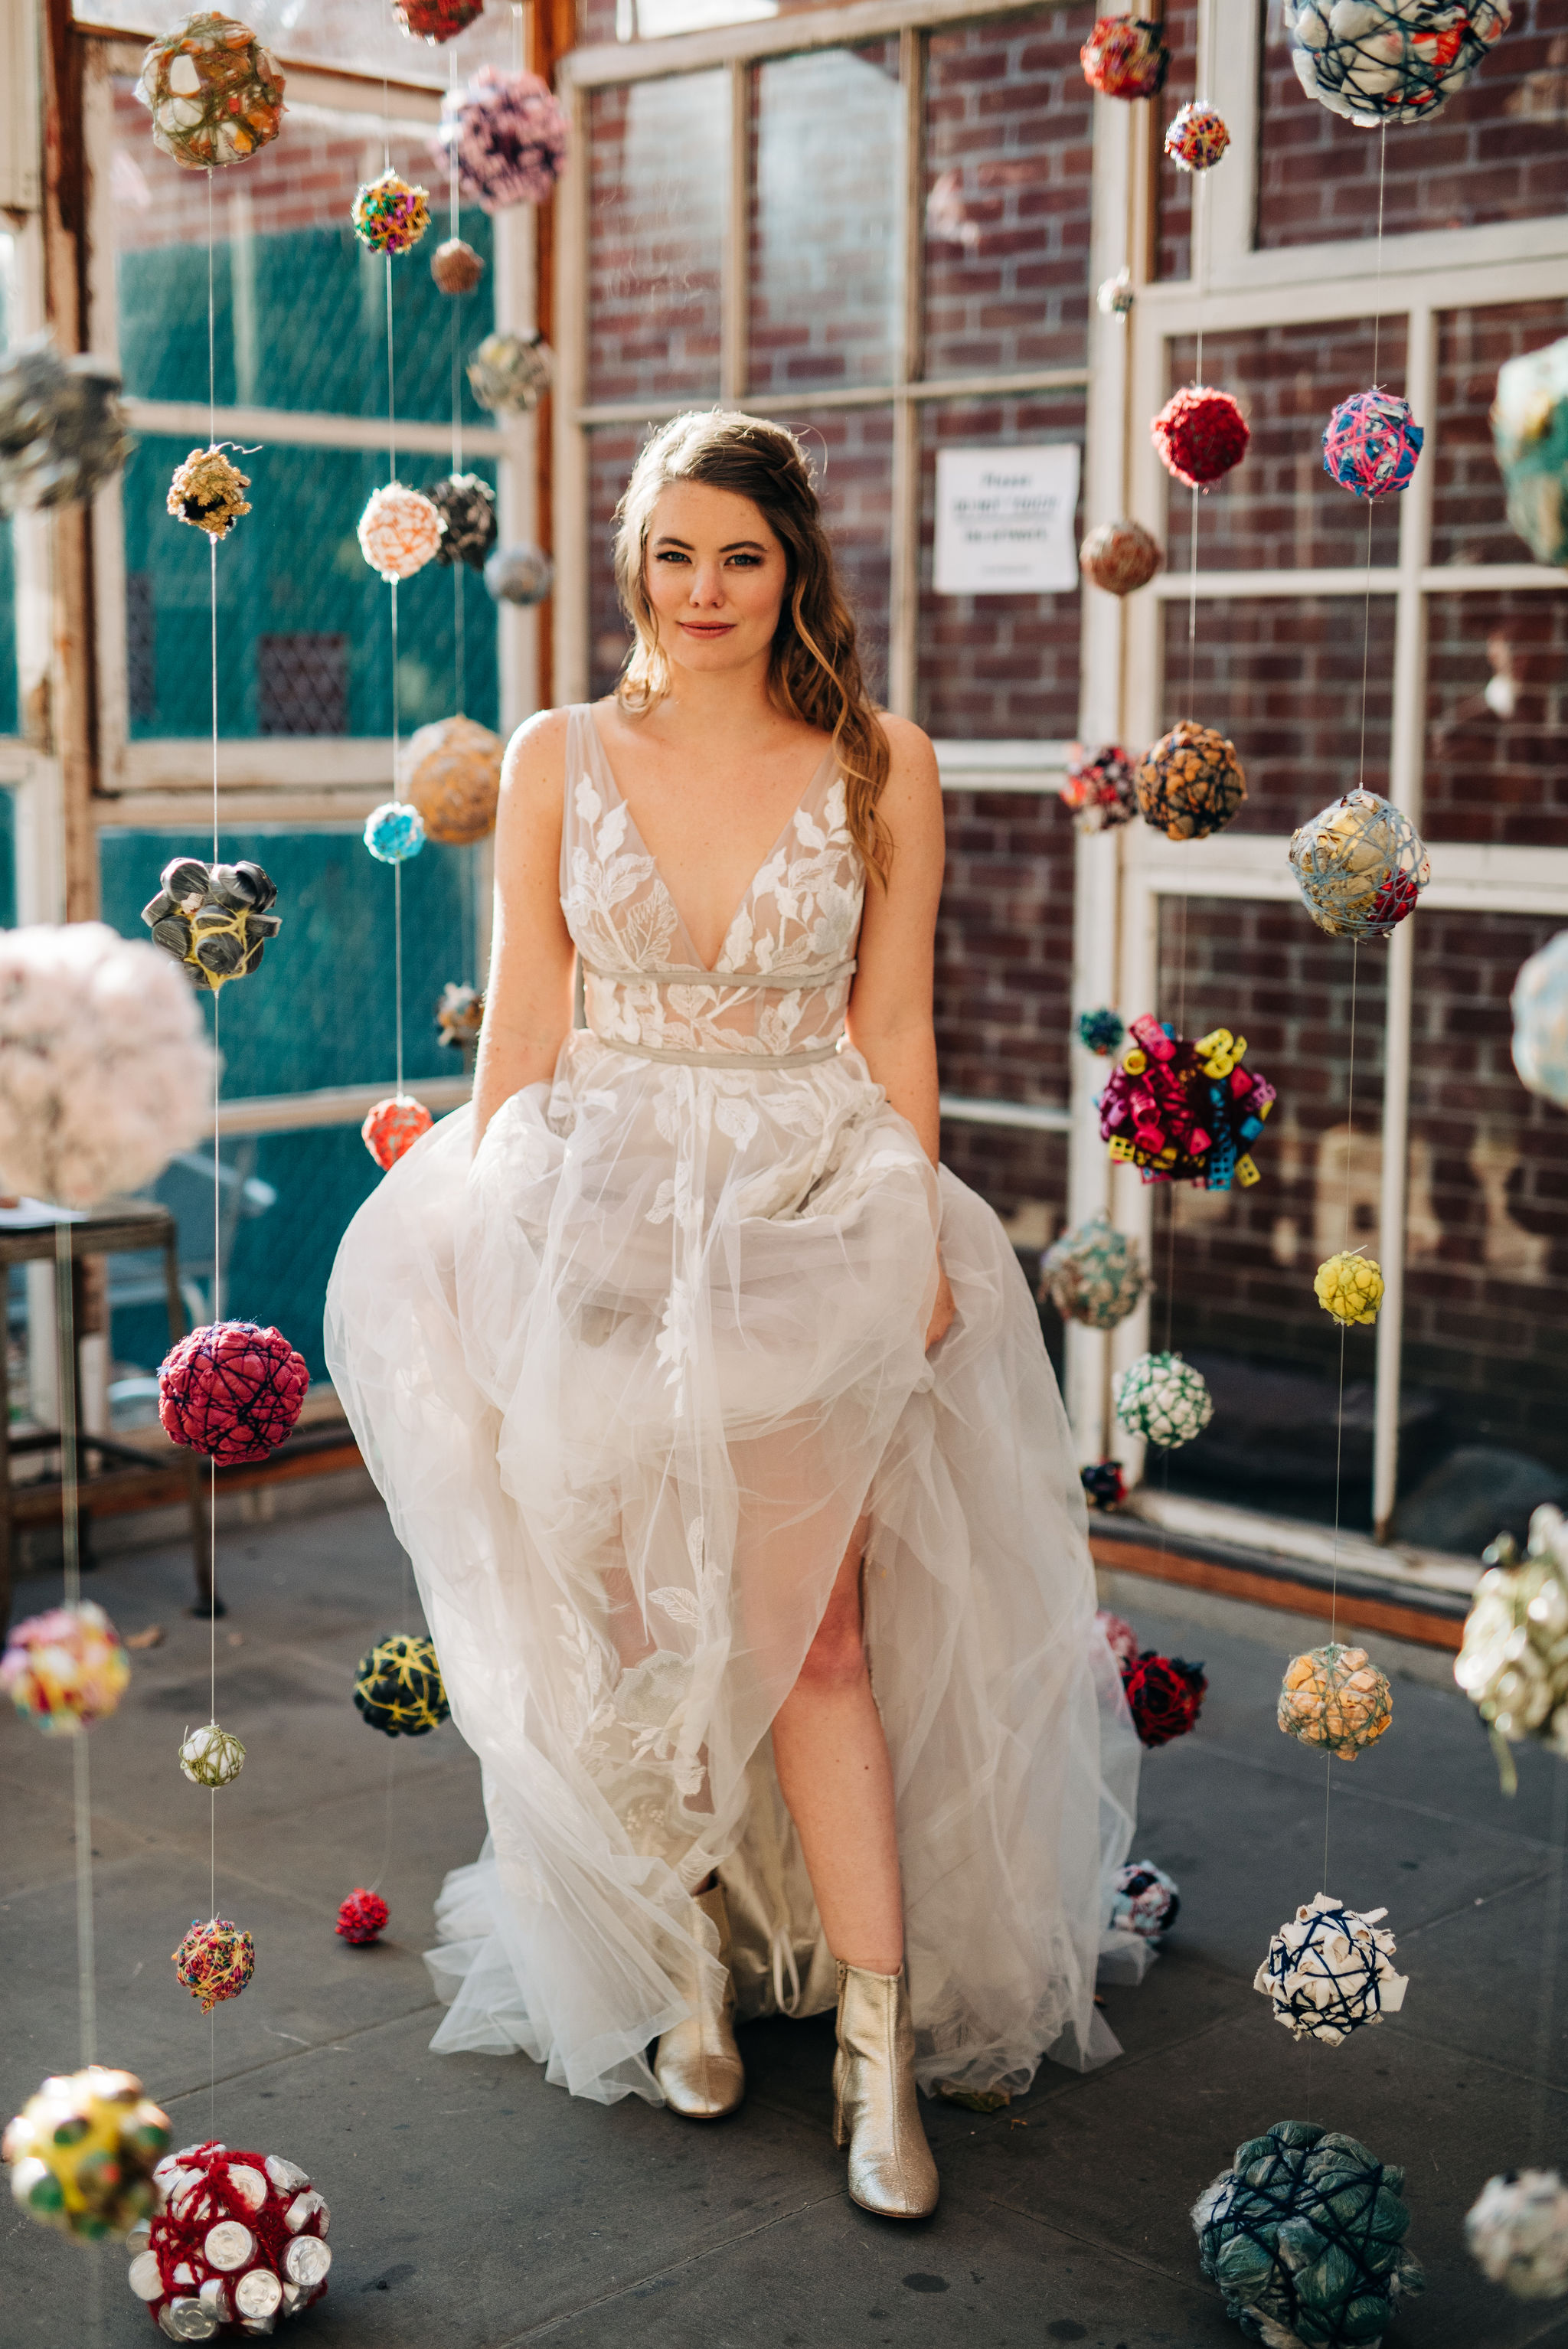 A photo of a white woman with brown hair in a wedding dress standing in a room full of pom poms hanging from the ceiling.